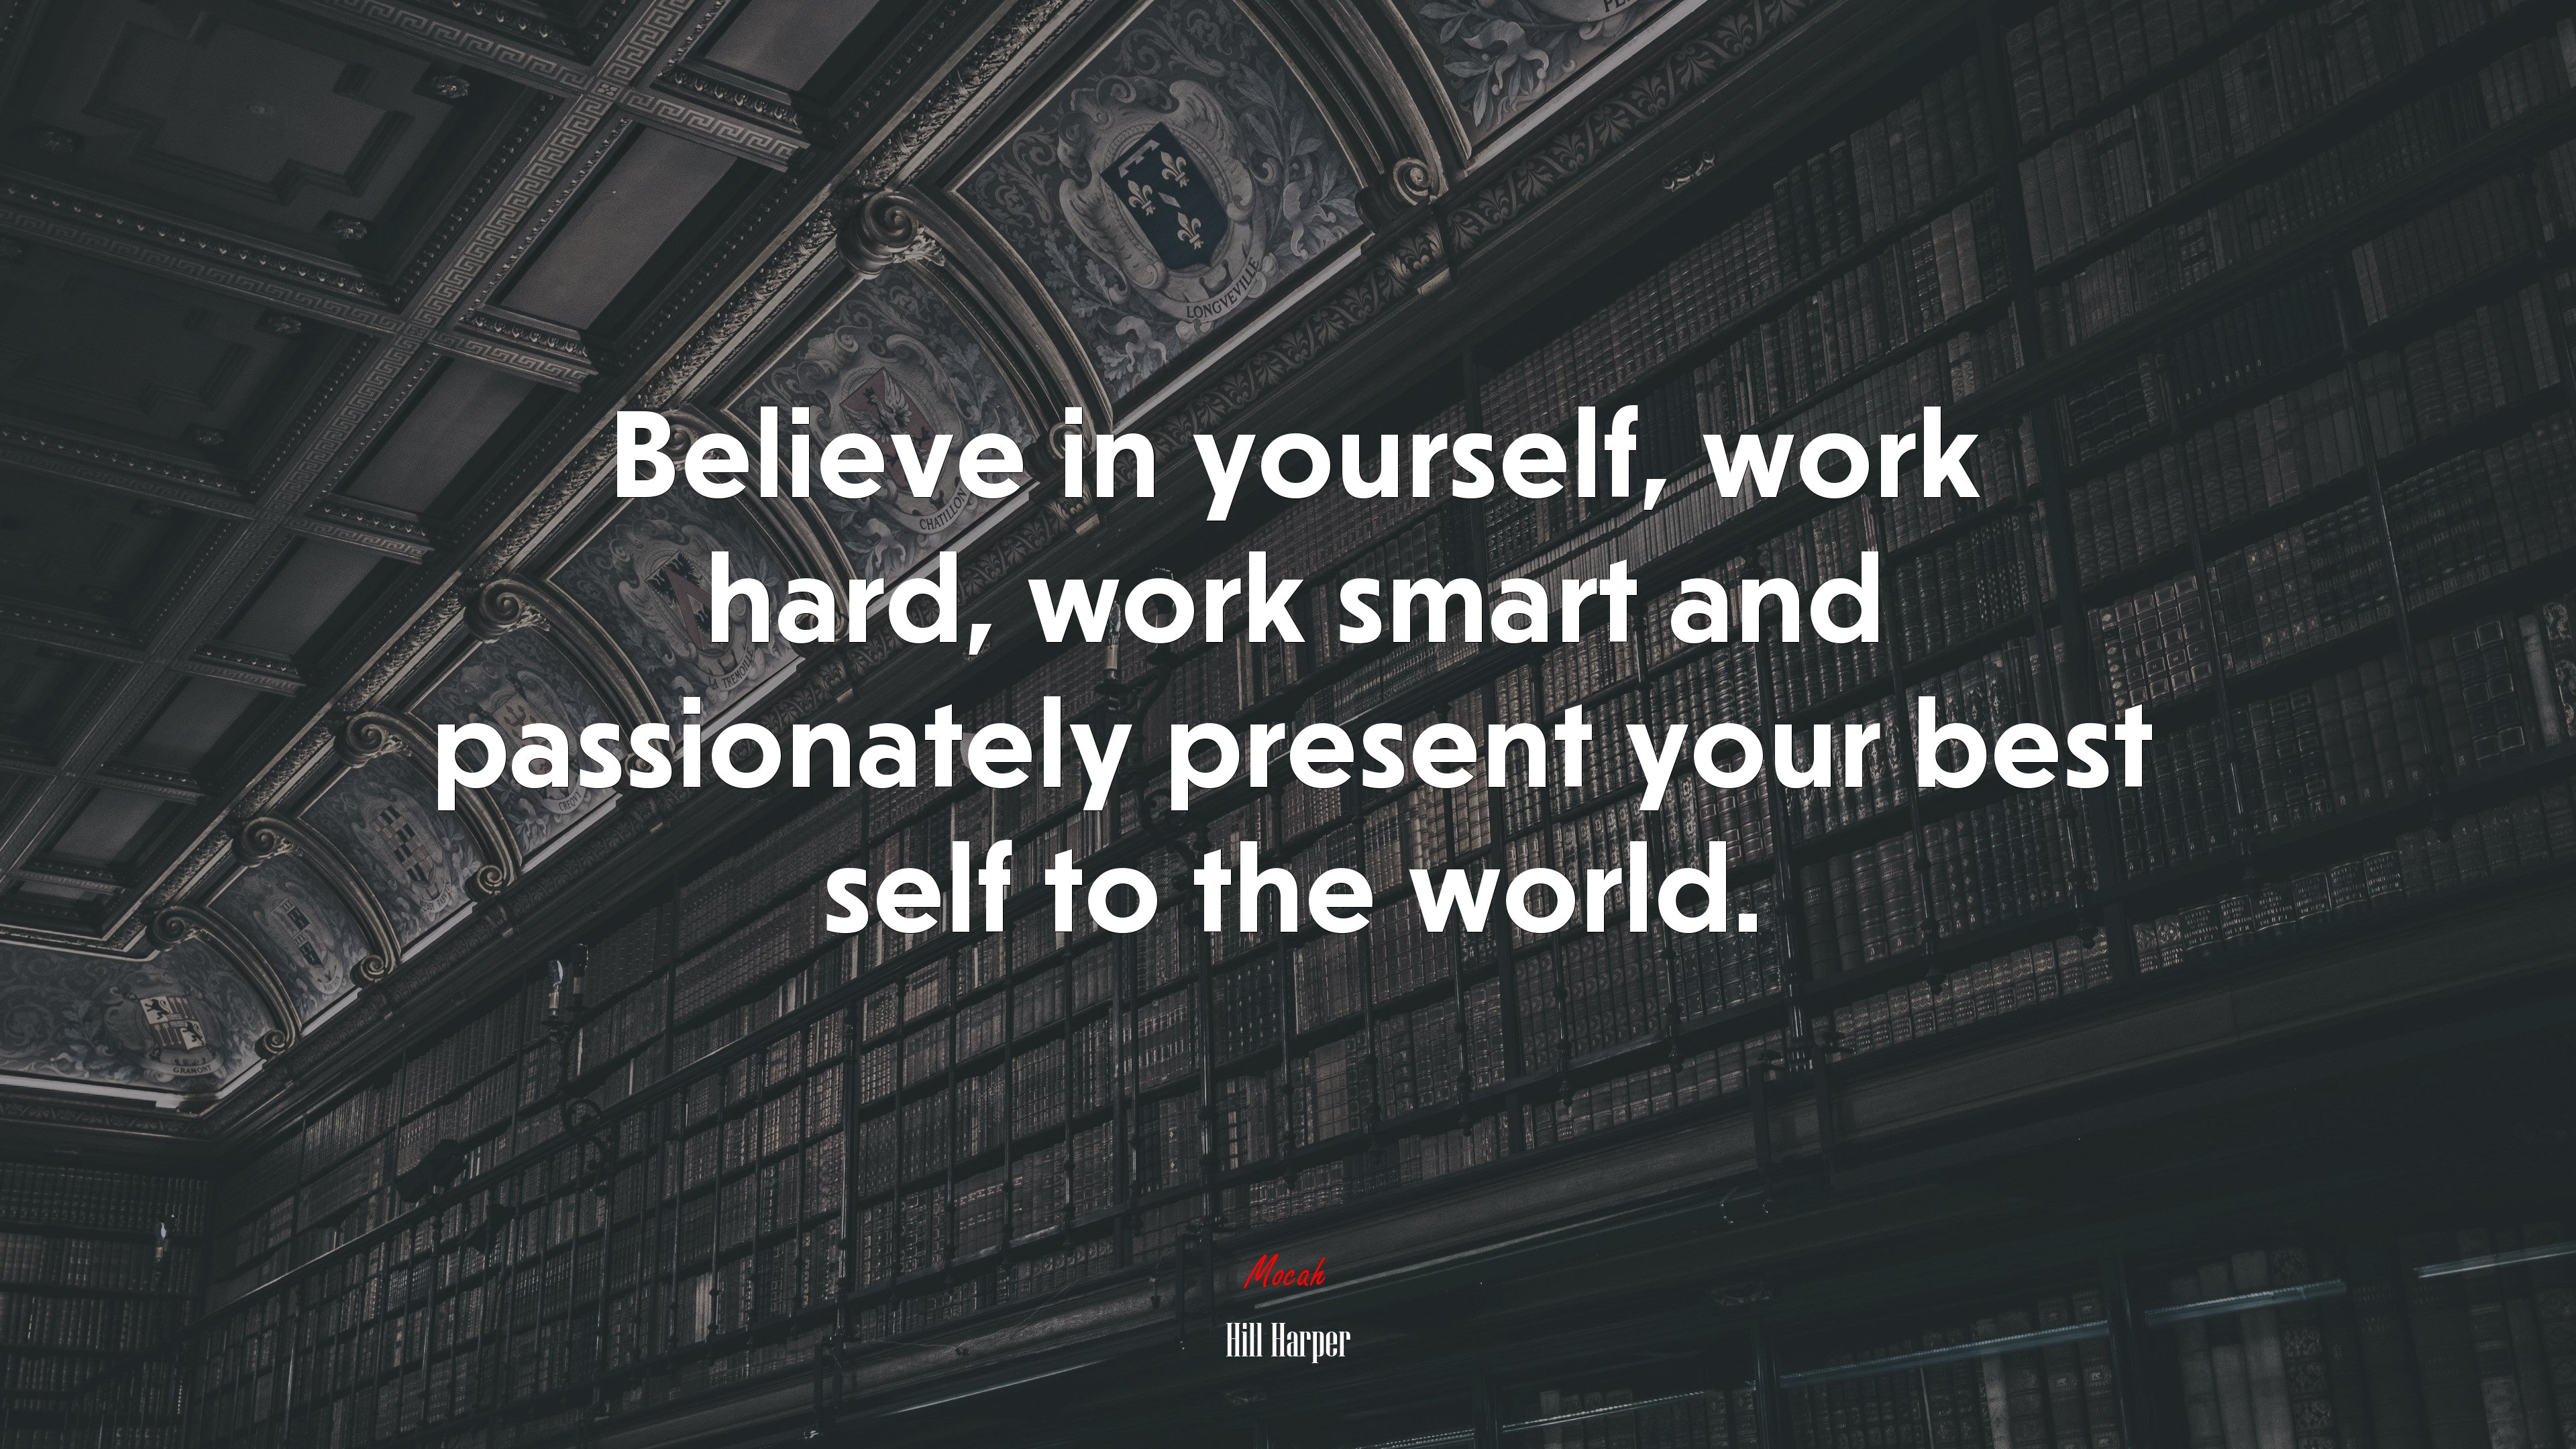 Believe in yourself, work hard, work smart and passionately present your best self to the world. Hill Harper quote Gallery HD Wallpaper